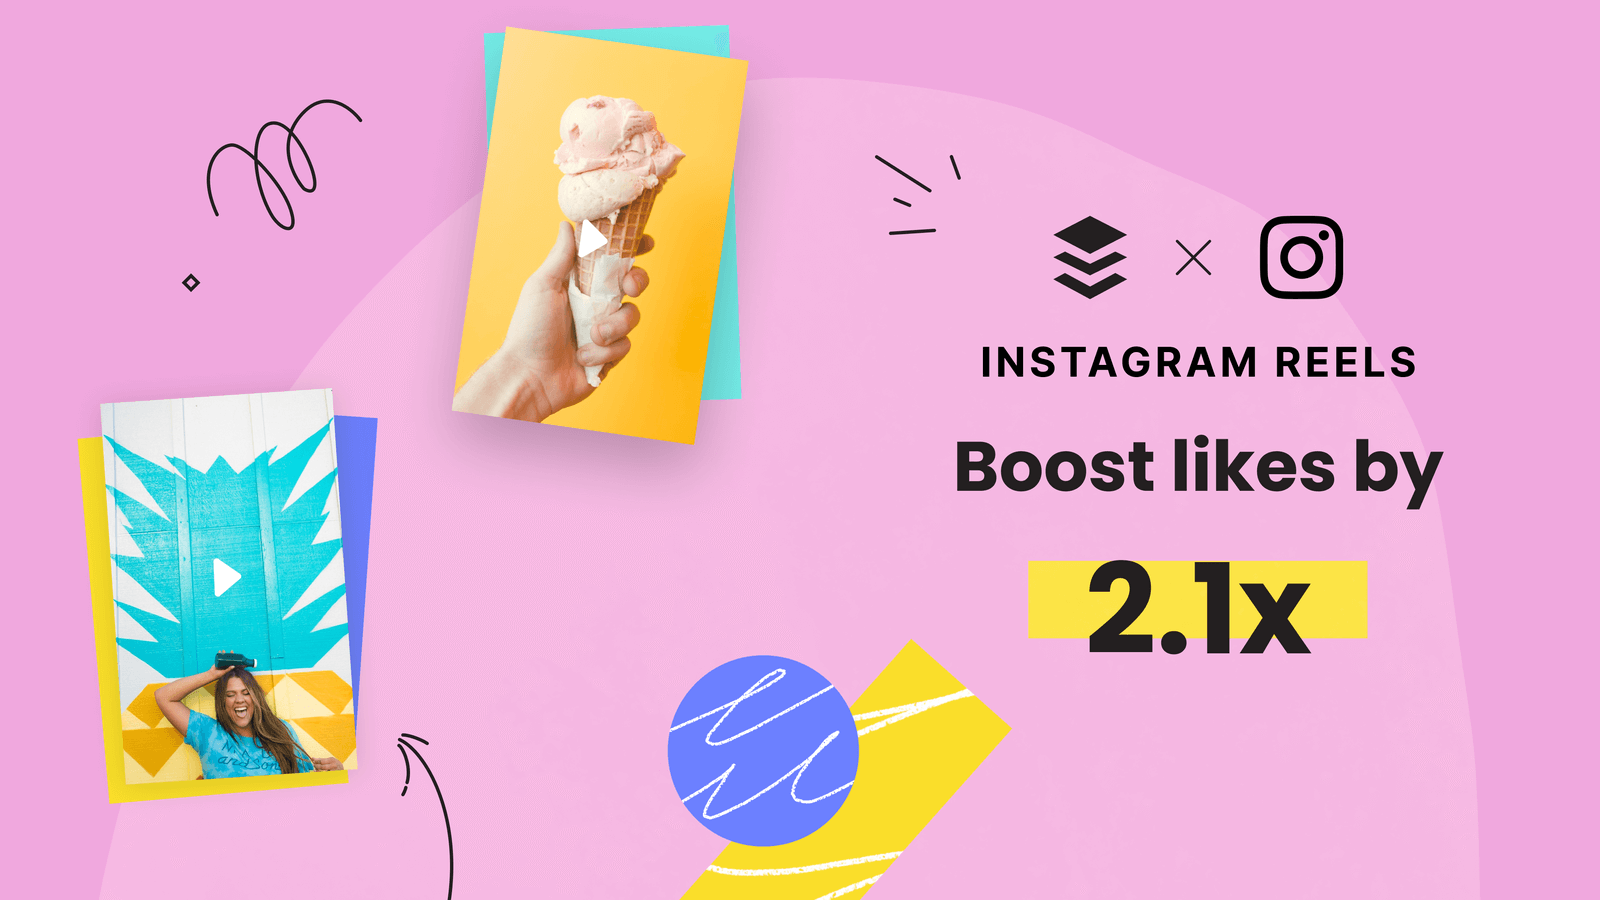 Reels boost likes by 2.1x